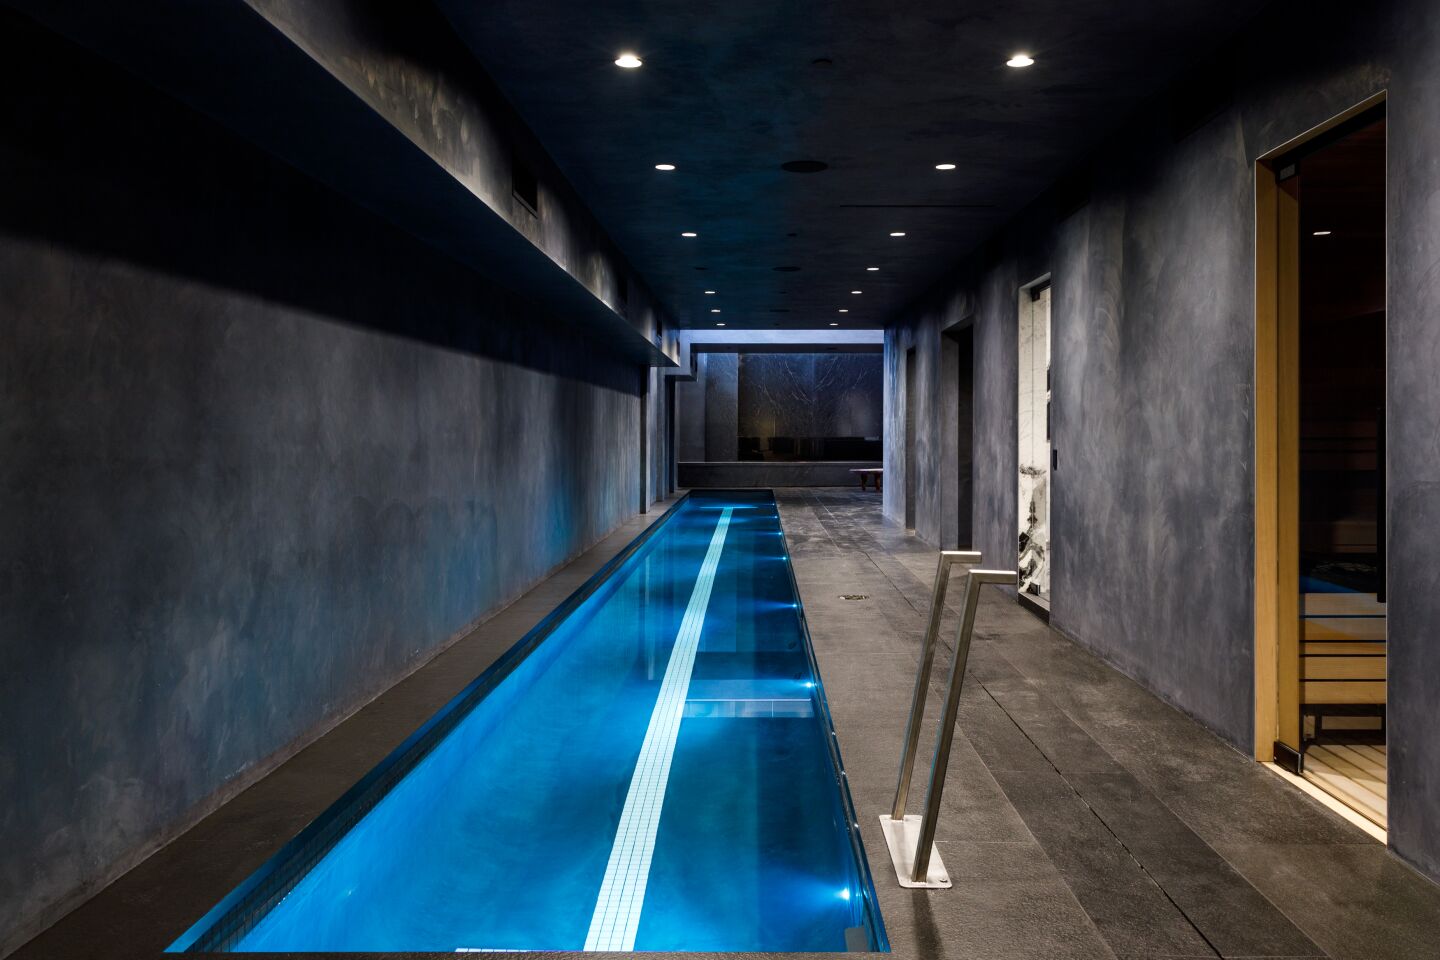 The home also has an indoor lap swimming pool.